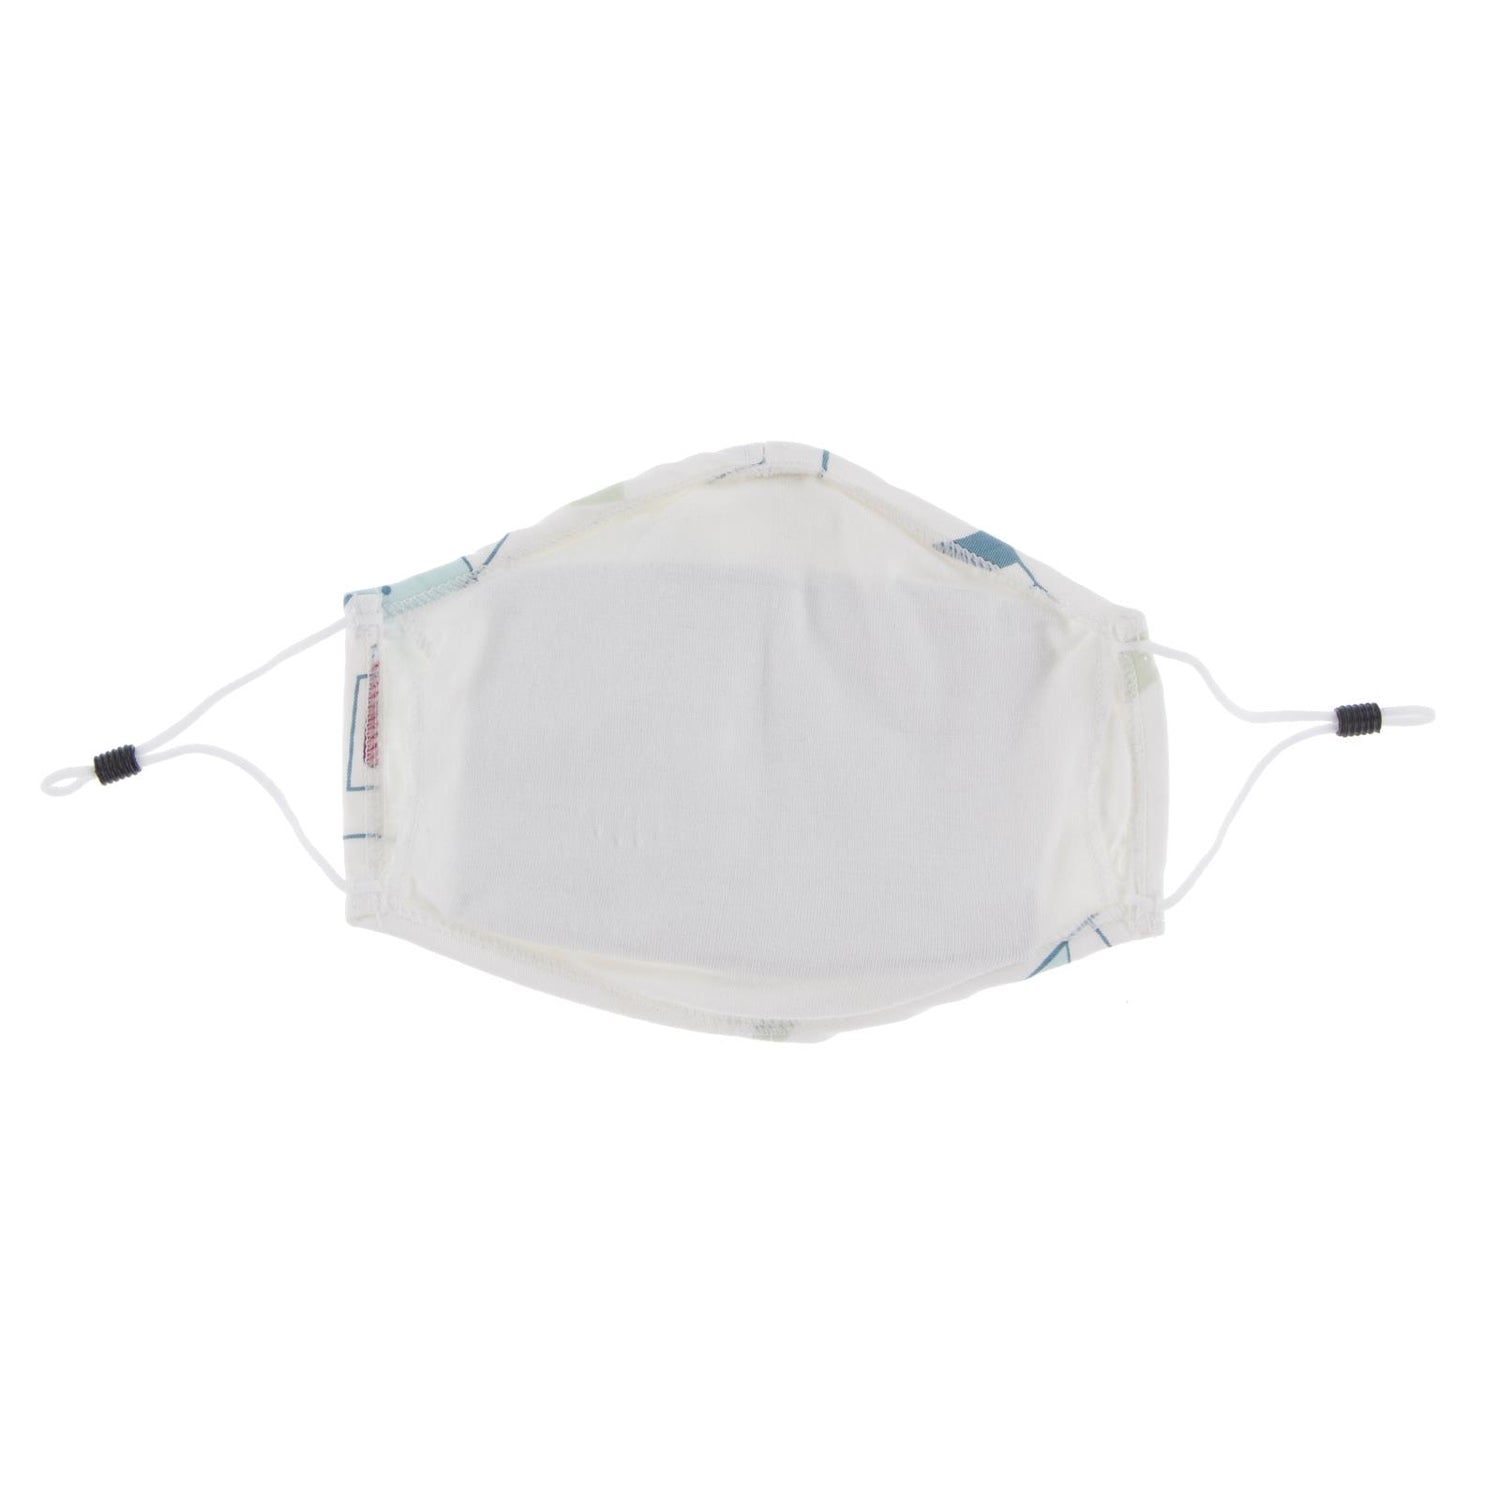 Print Waterproof Mask with Covered Vent and Filter for Kids in Natural Chemistry Lab